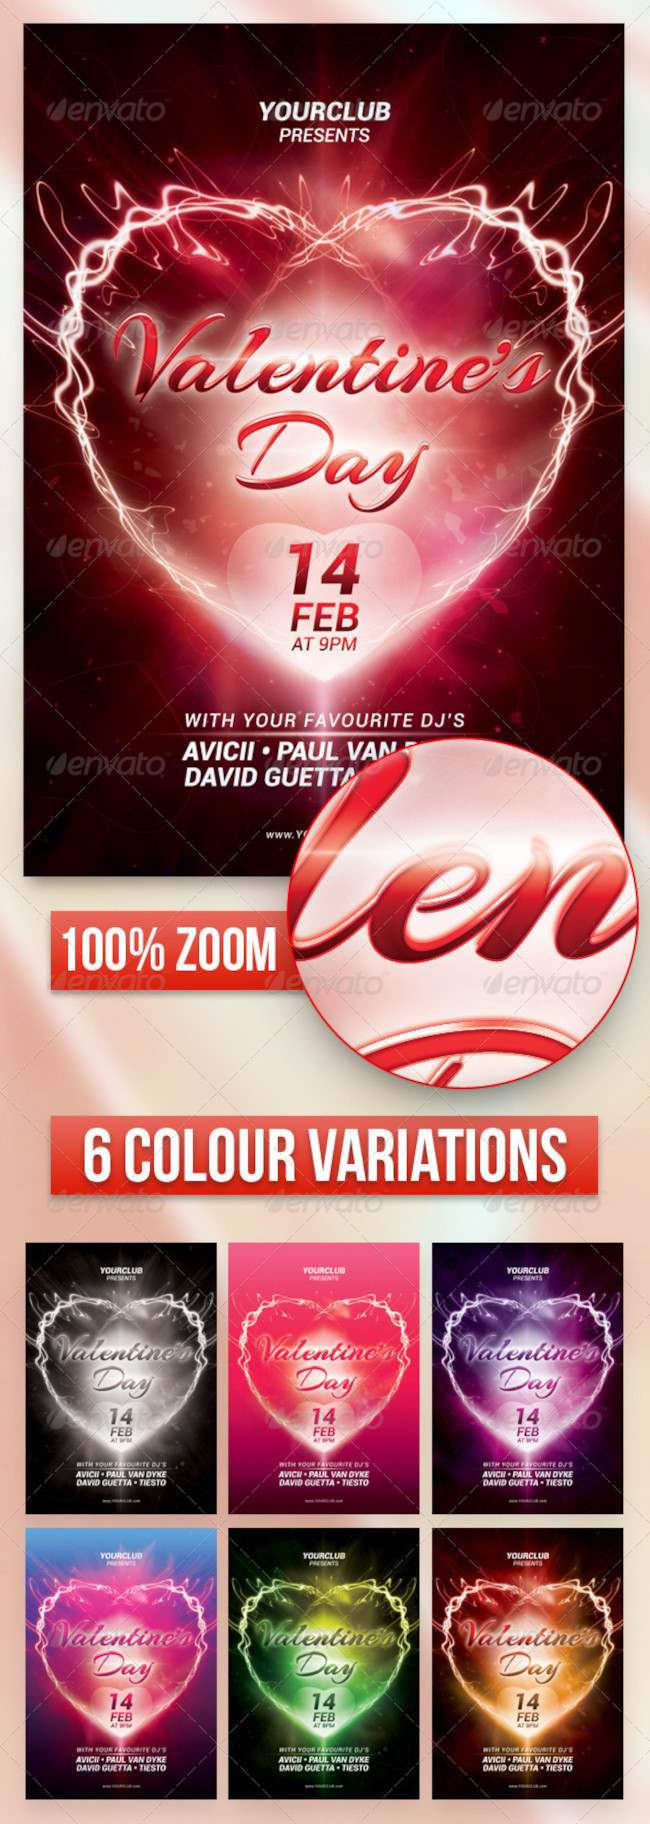 free valentines party flyer in psd